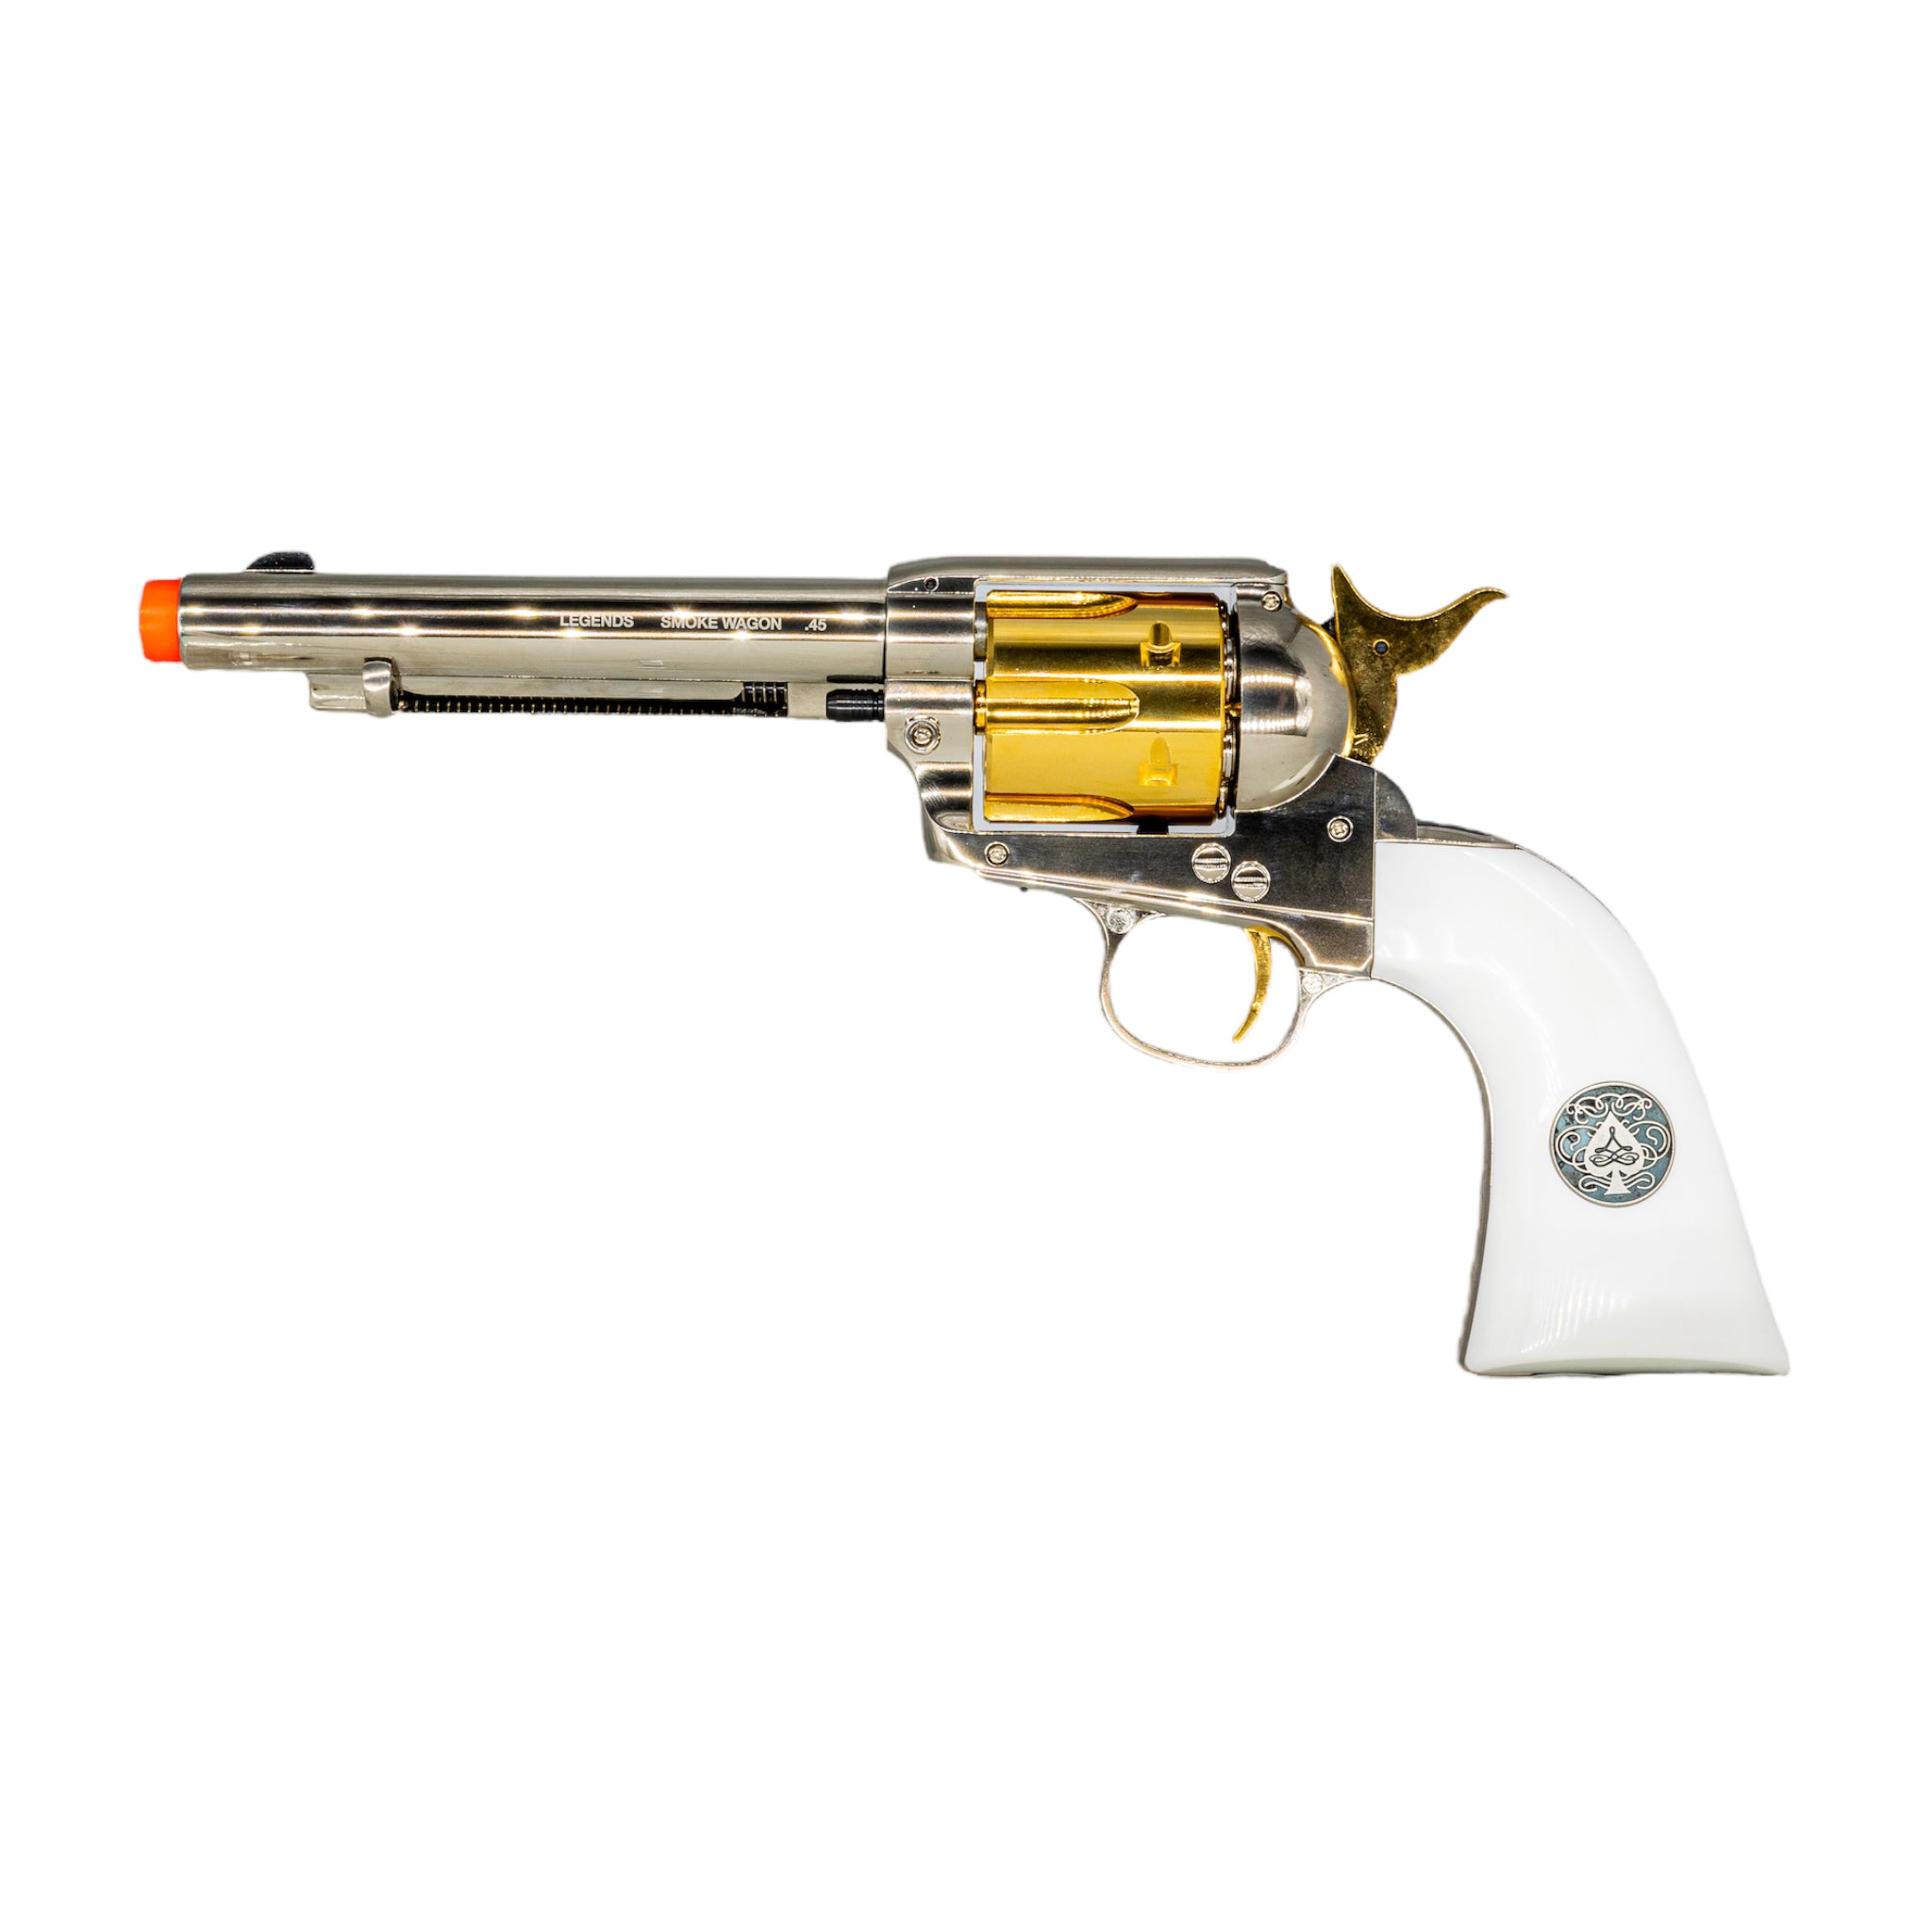 Legends Smokewagon CO2 Airsoft Revolver [Limited Edition] (Nickel